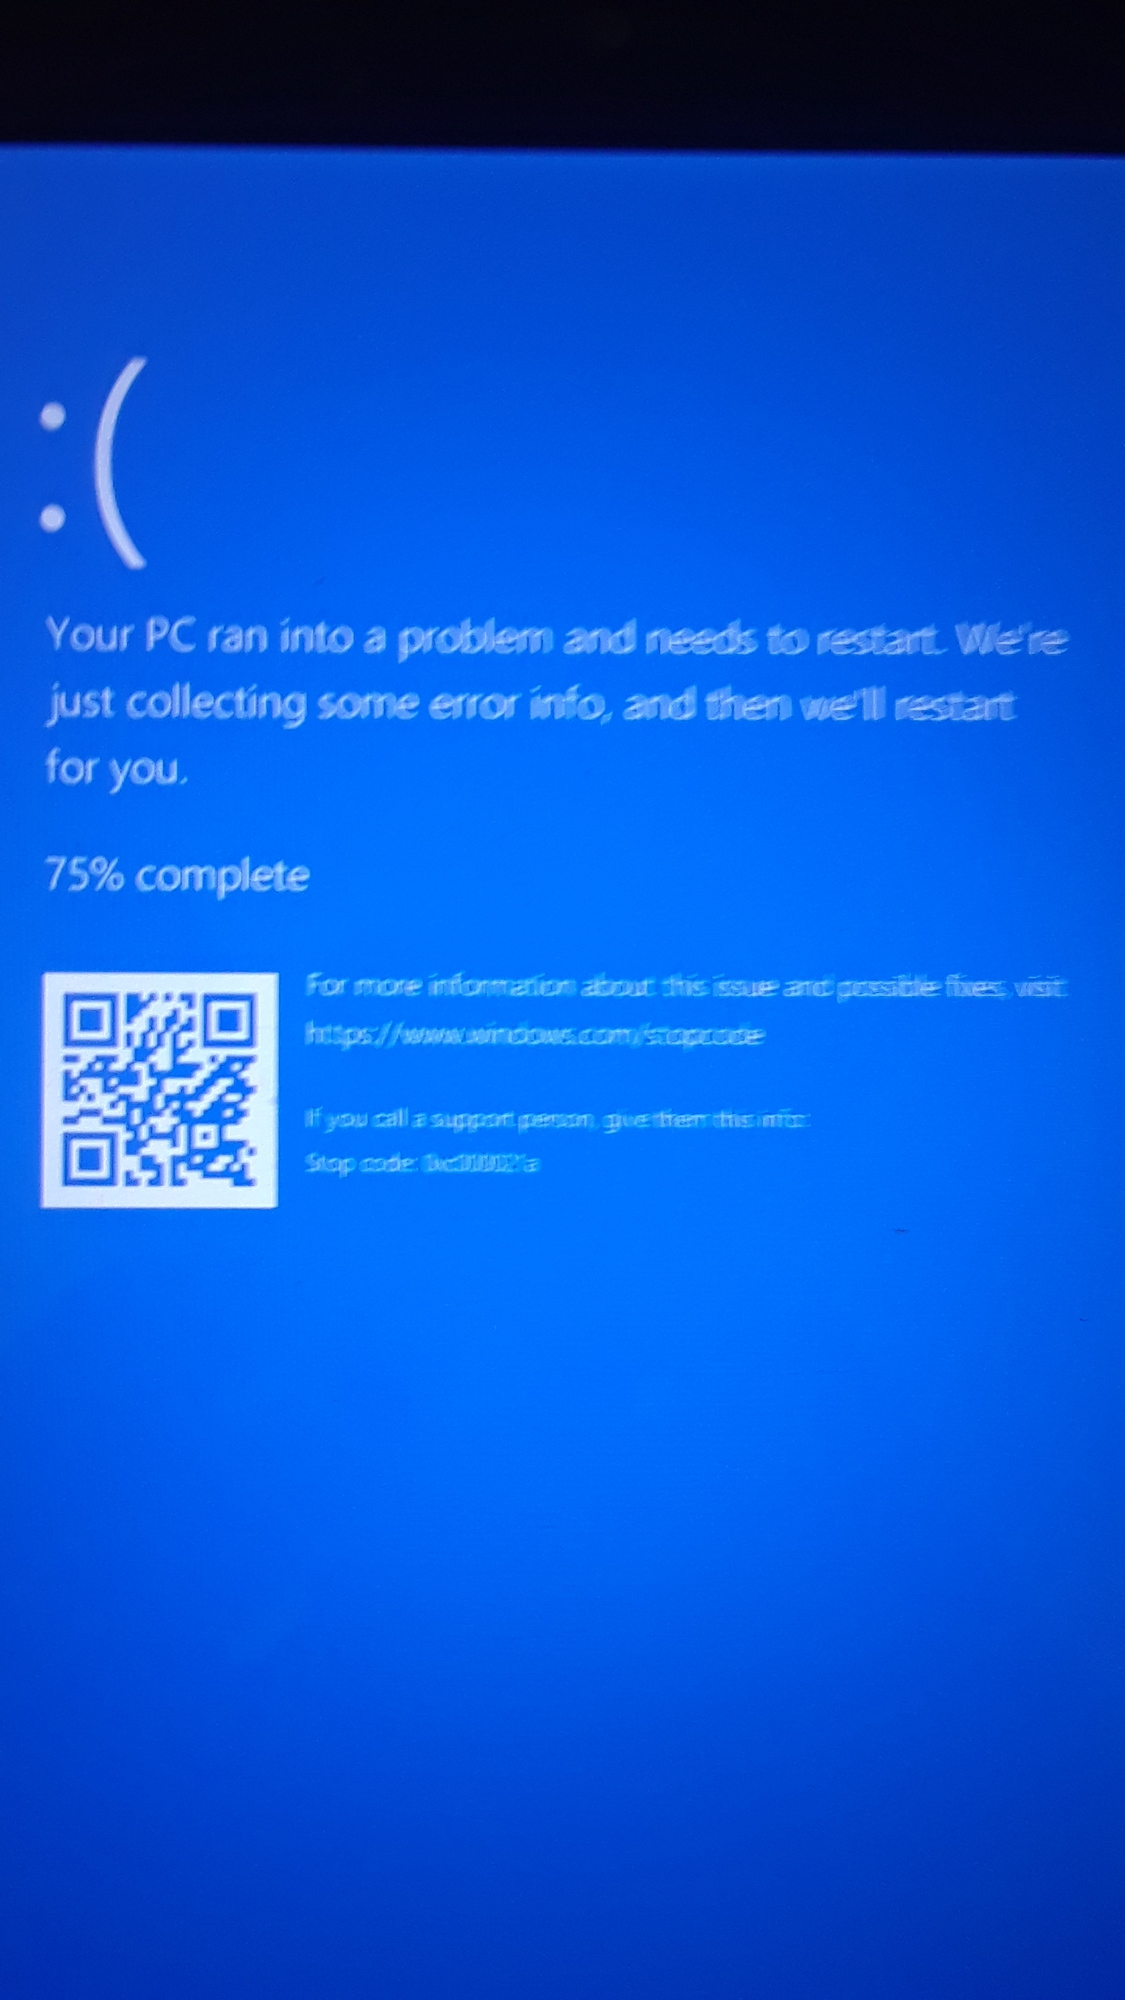 I have a Windows 10 Cambodia and it keeps going to the blue screen giving me a code... caa13c94-51ad-407a-8d8a-1736eb8e73db?upload=true.jpg